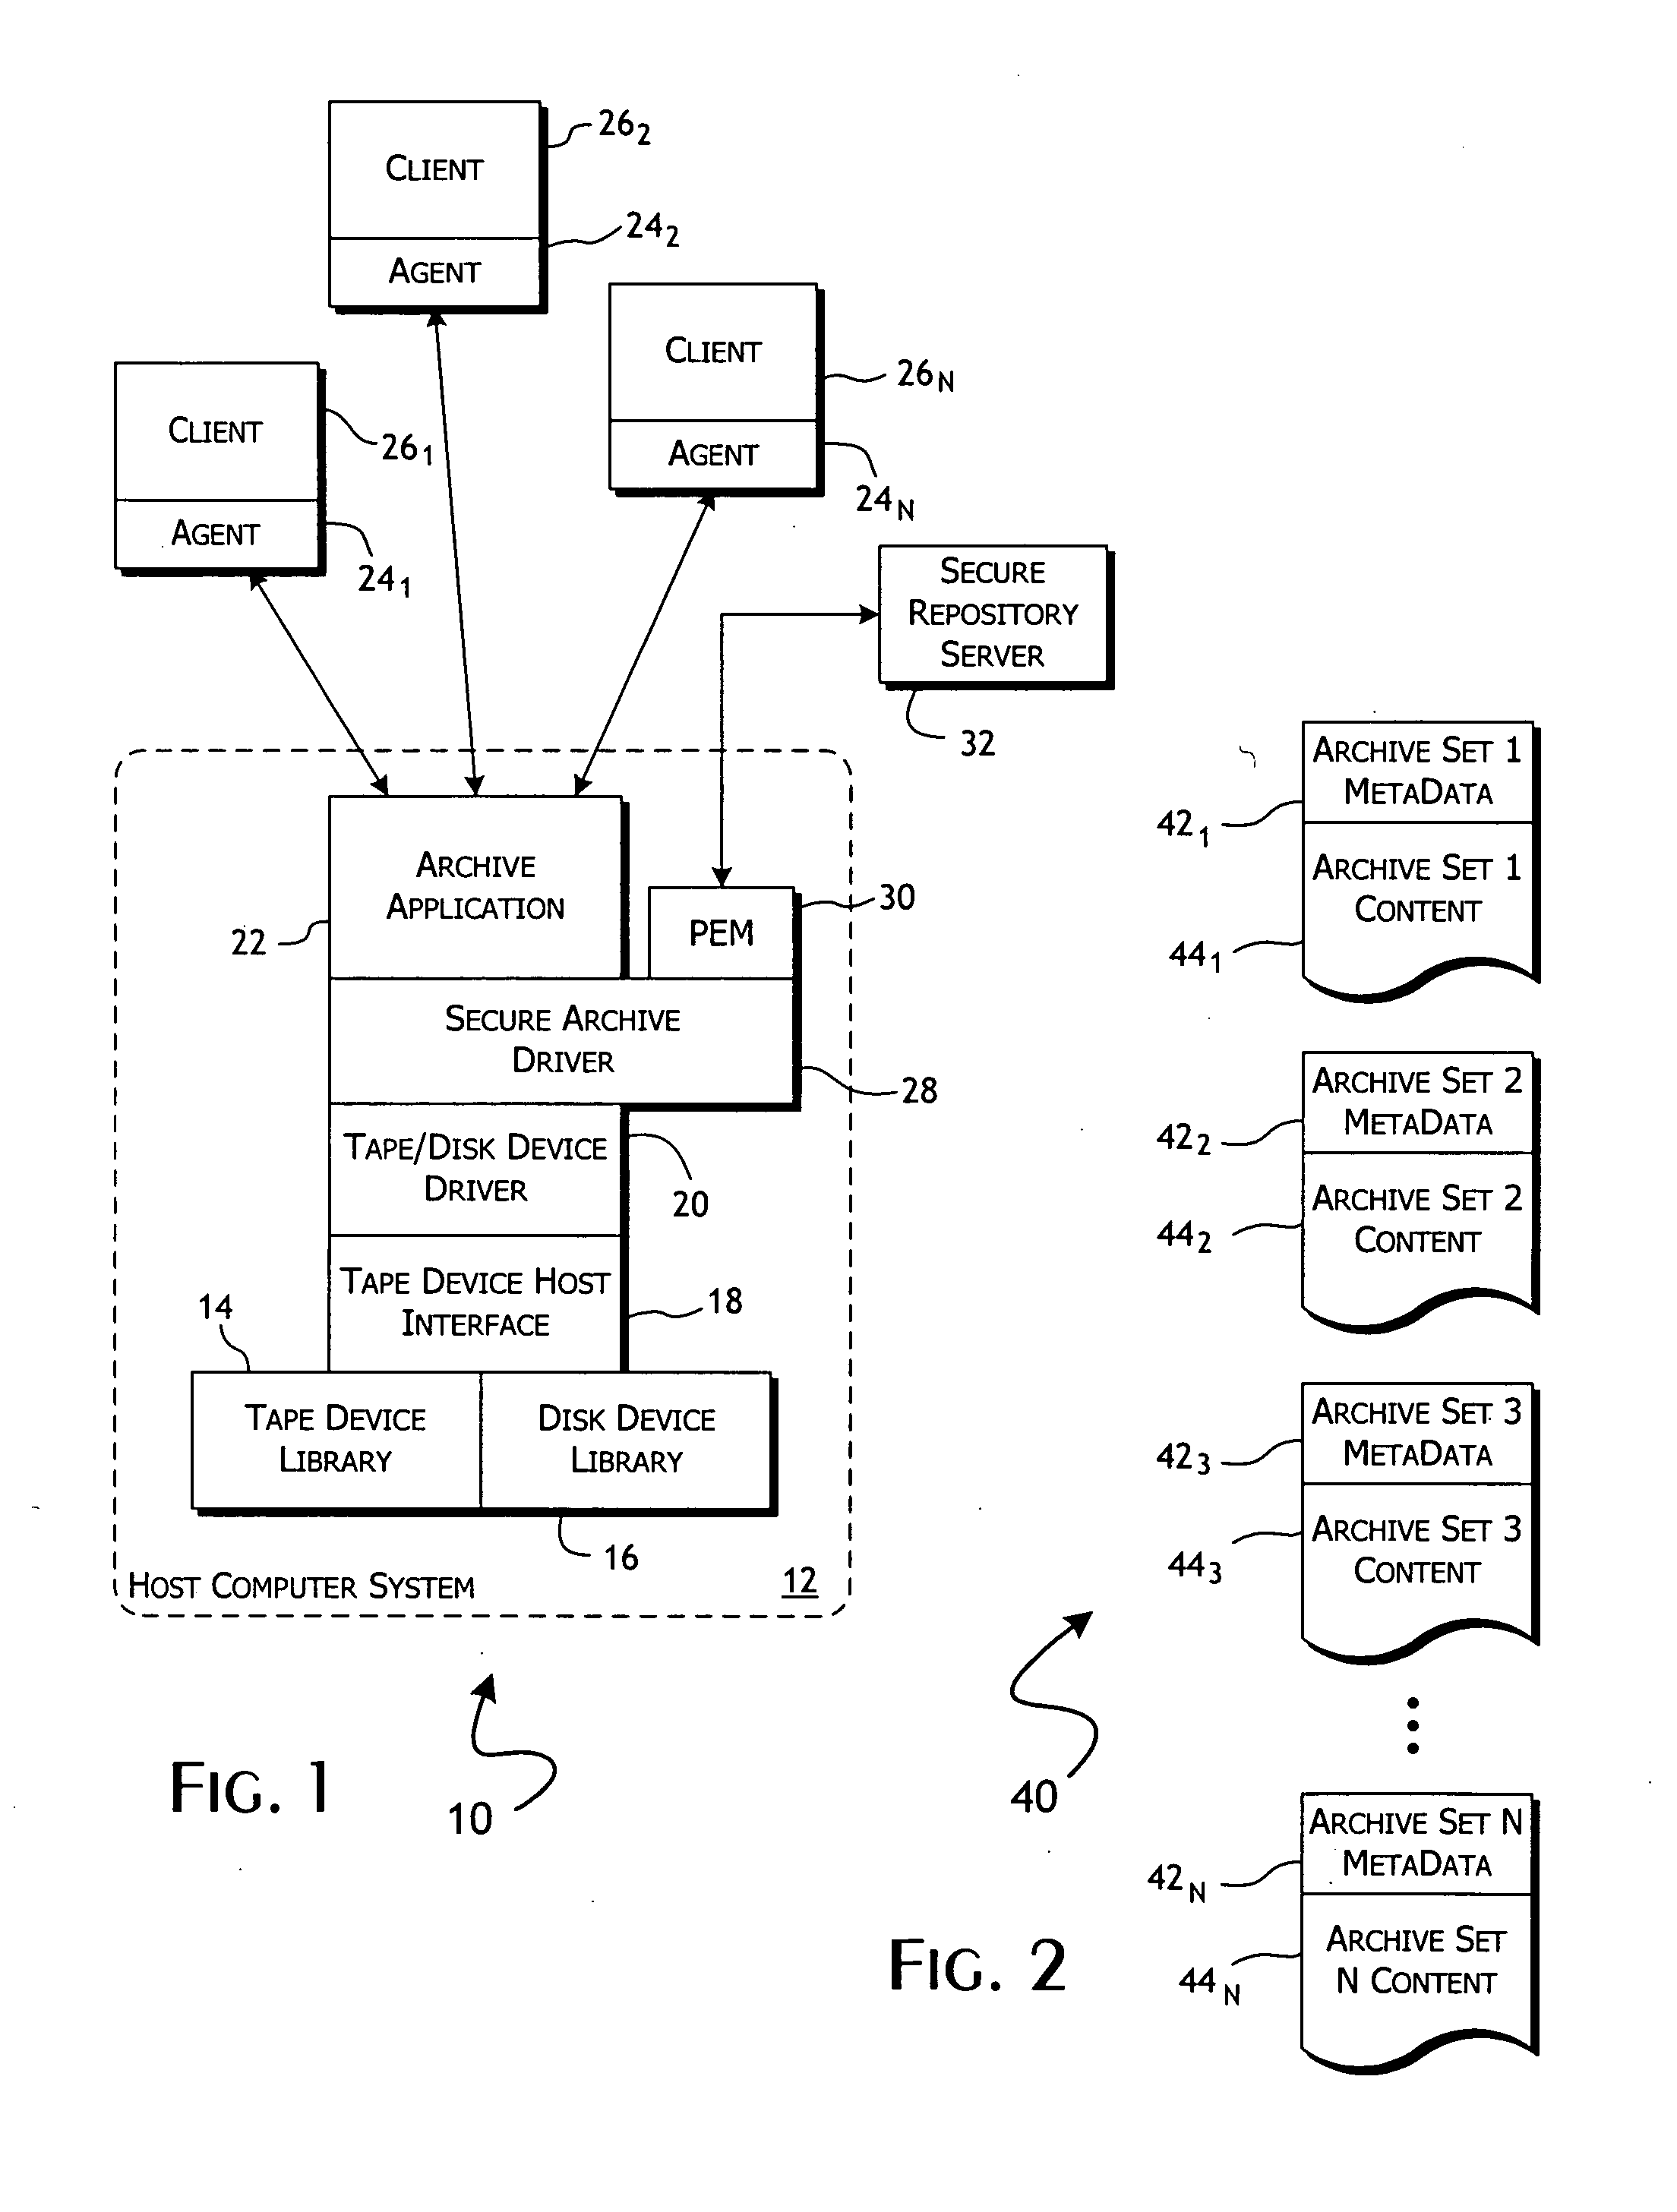 System and methods for secure digital data archiving and access auditing